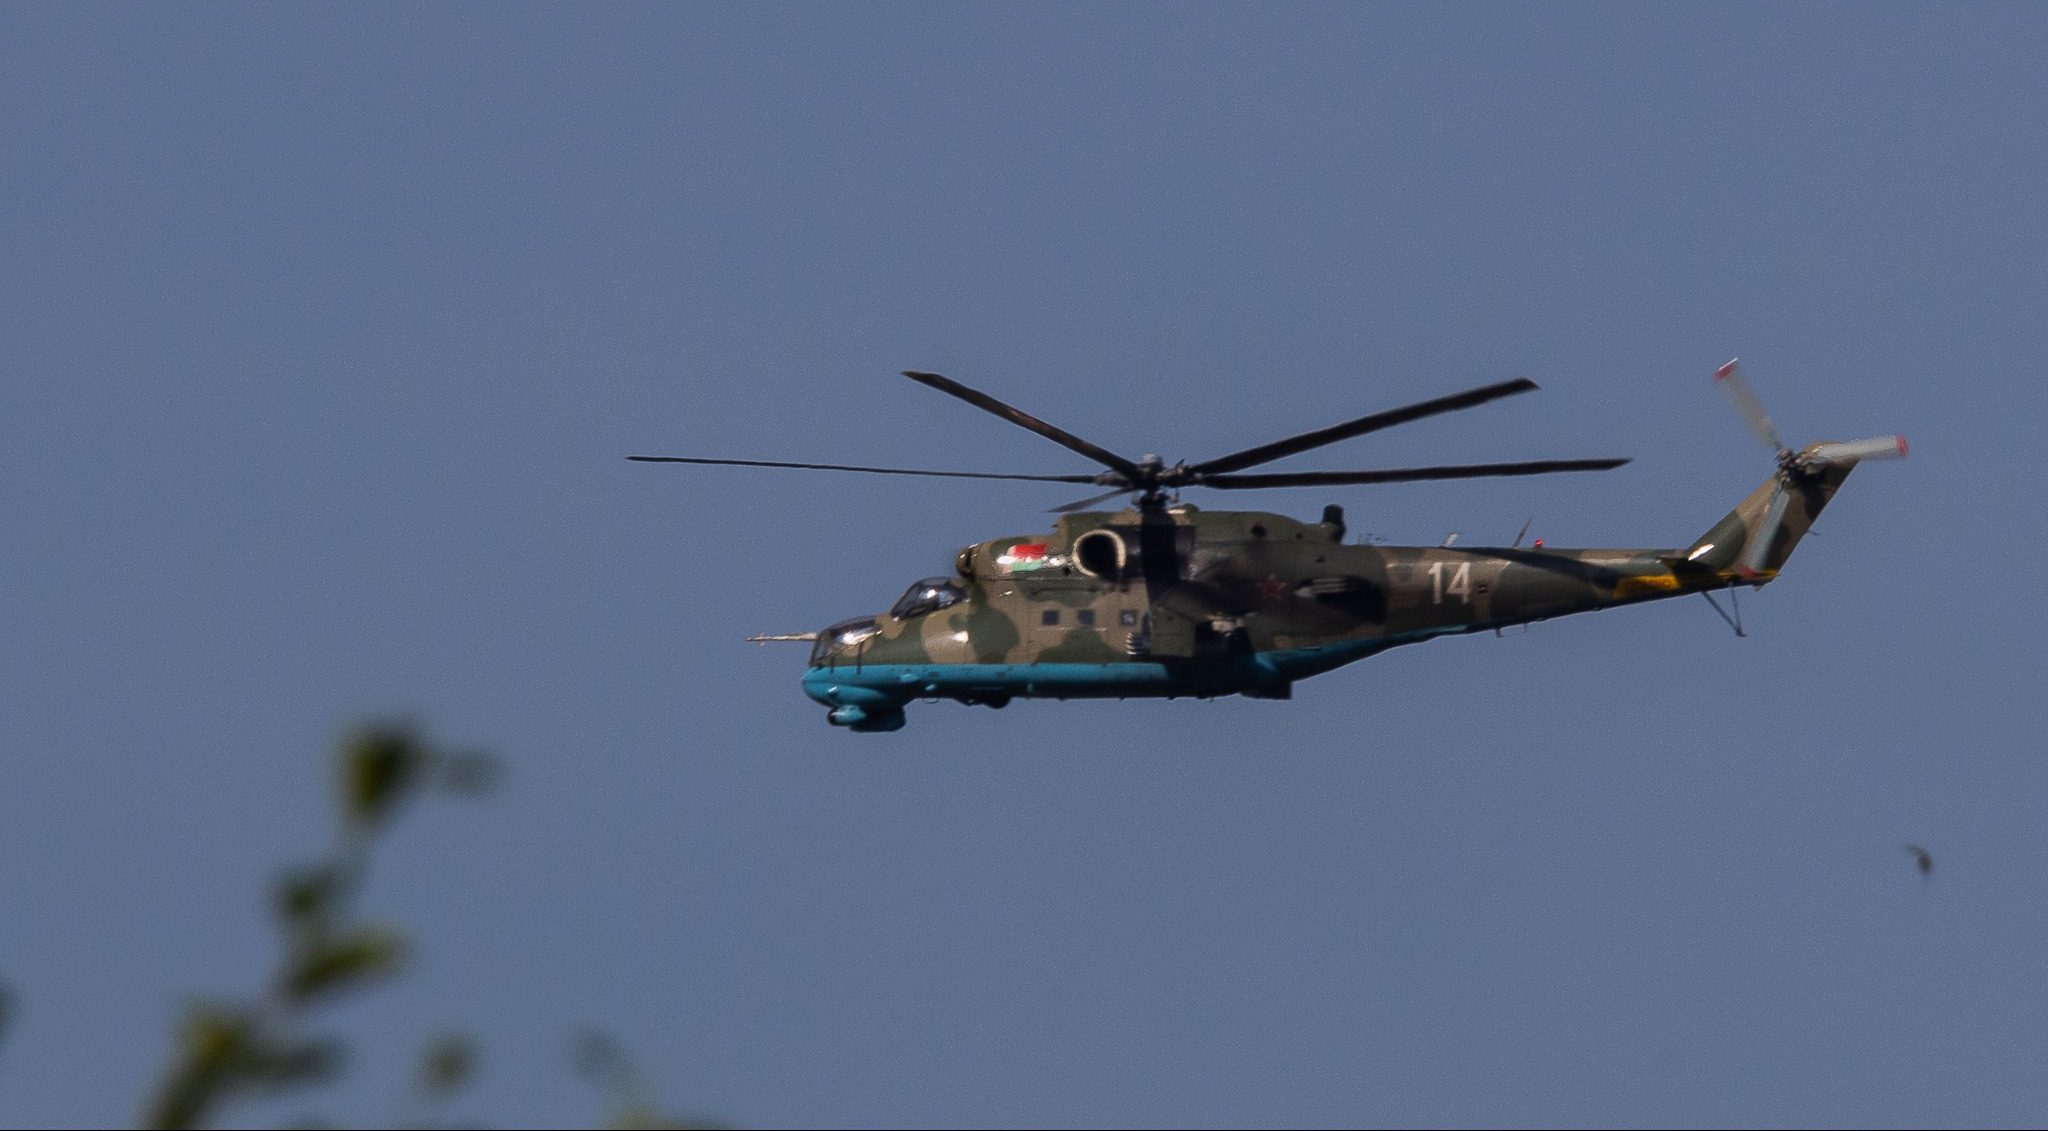 Belarusian helicopters fly into Polish airspace